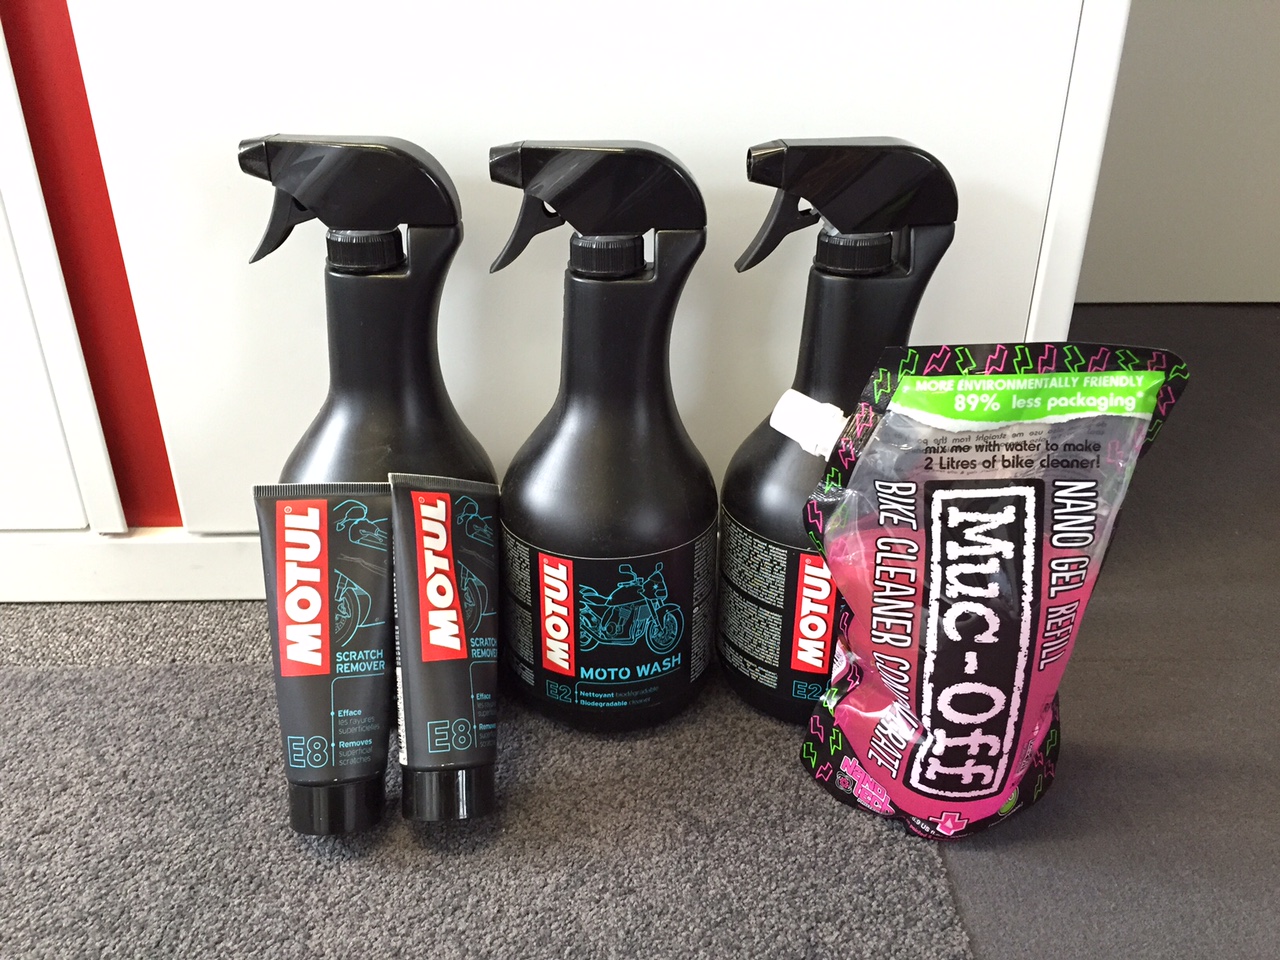 Review your bike to win Motul and Muc-Off goodies